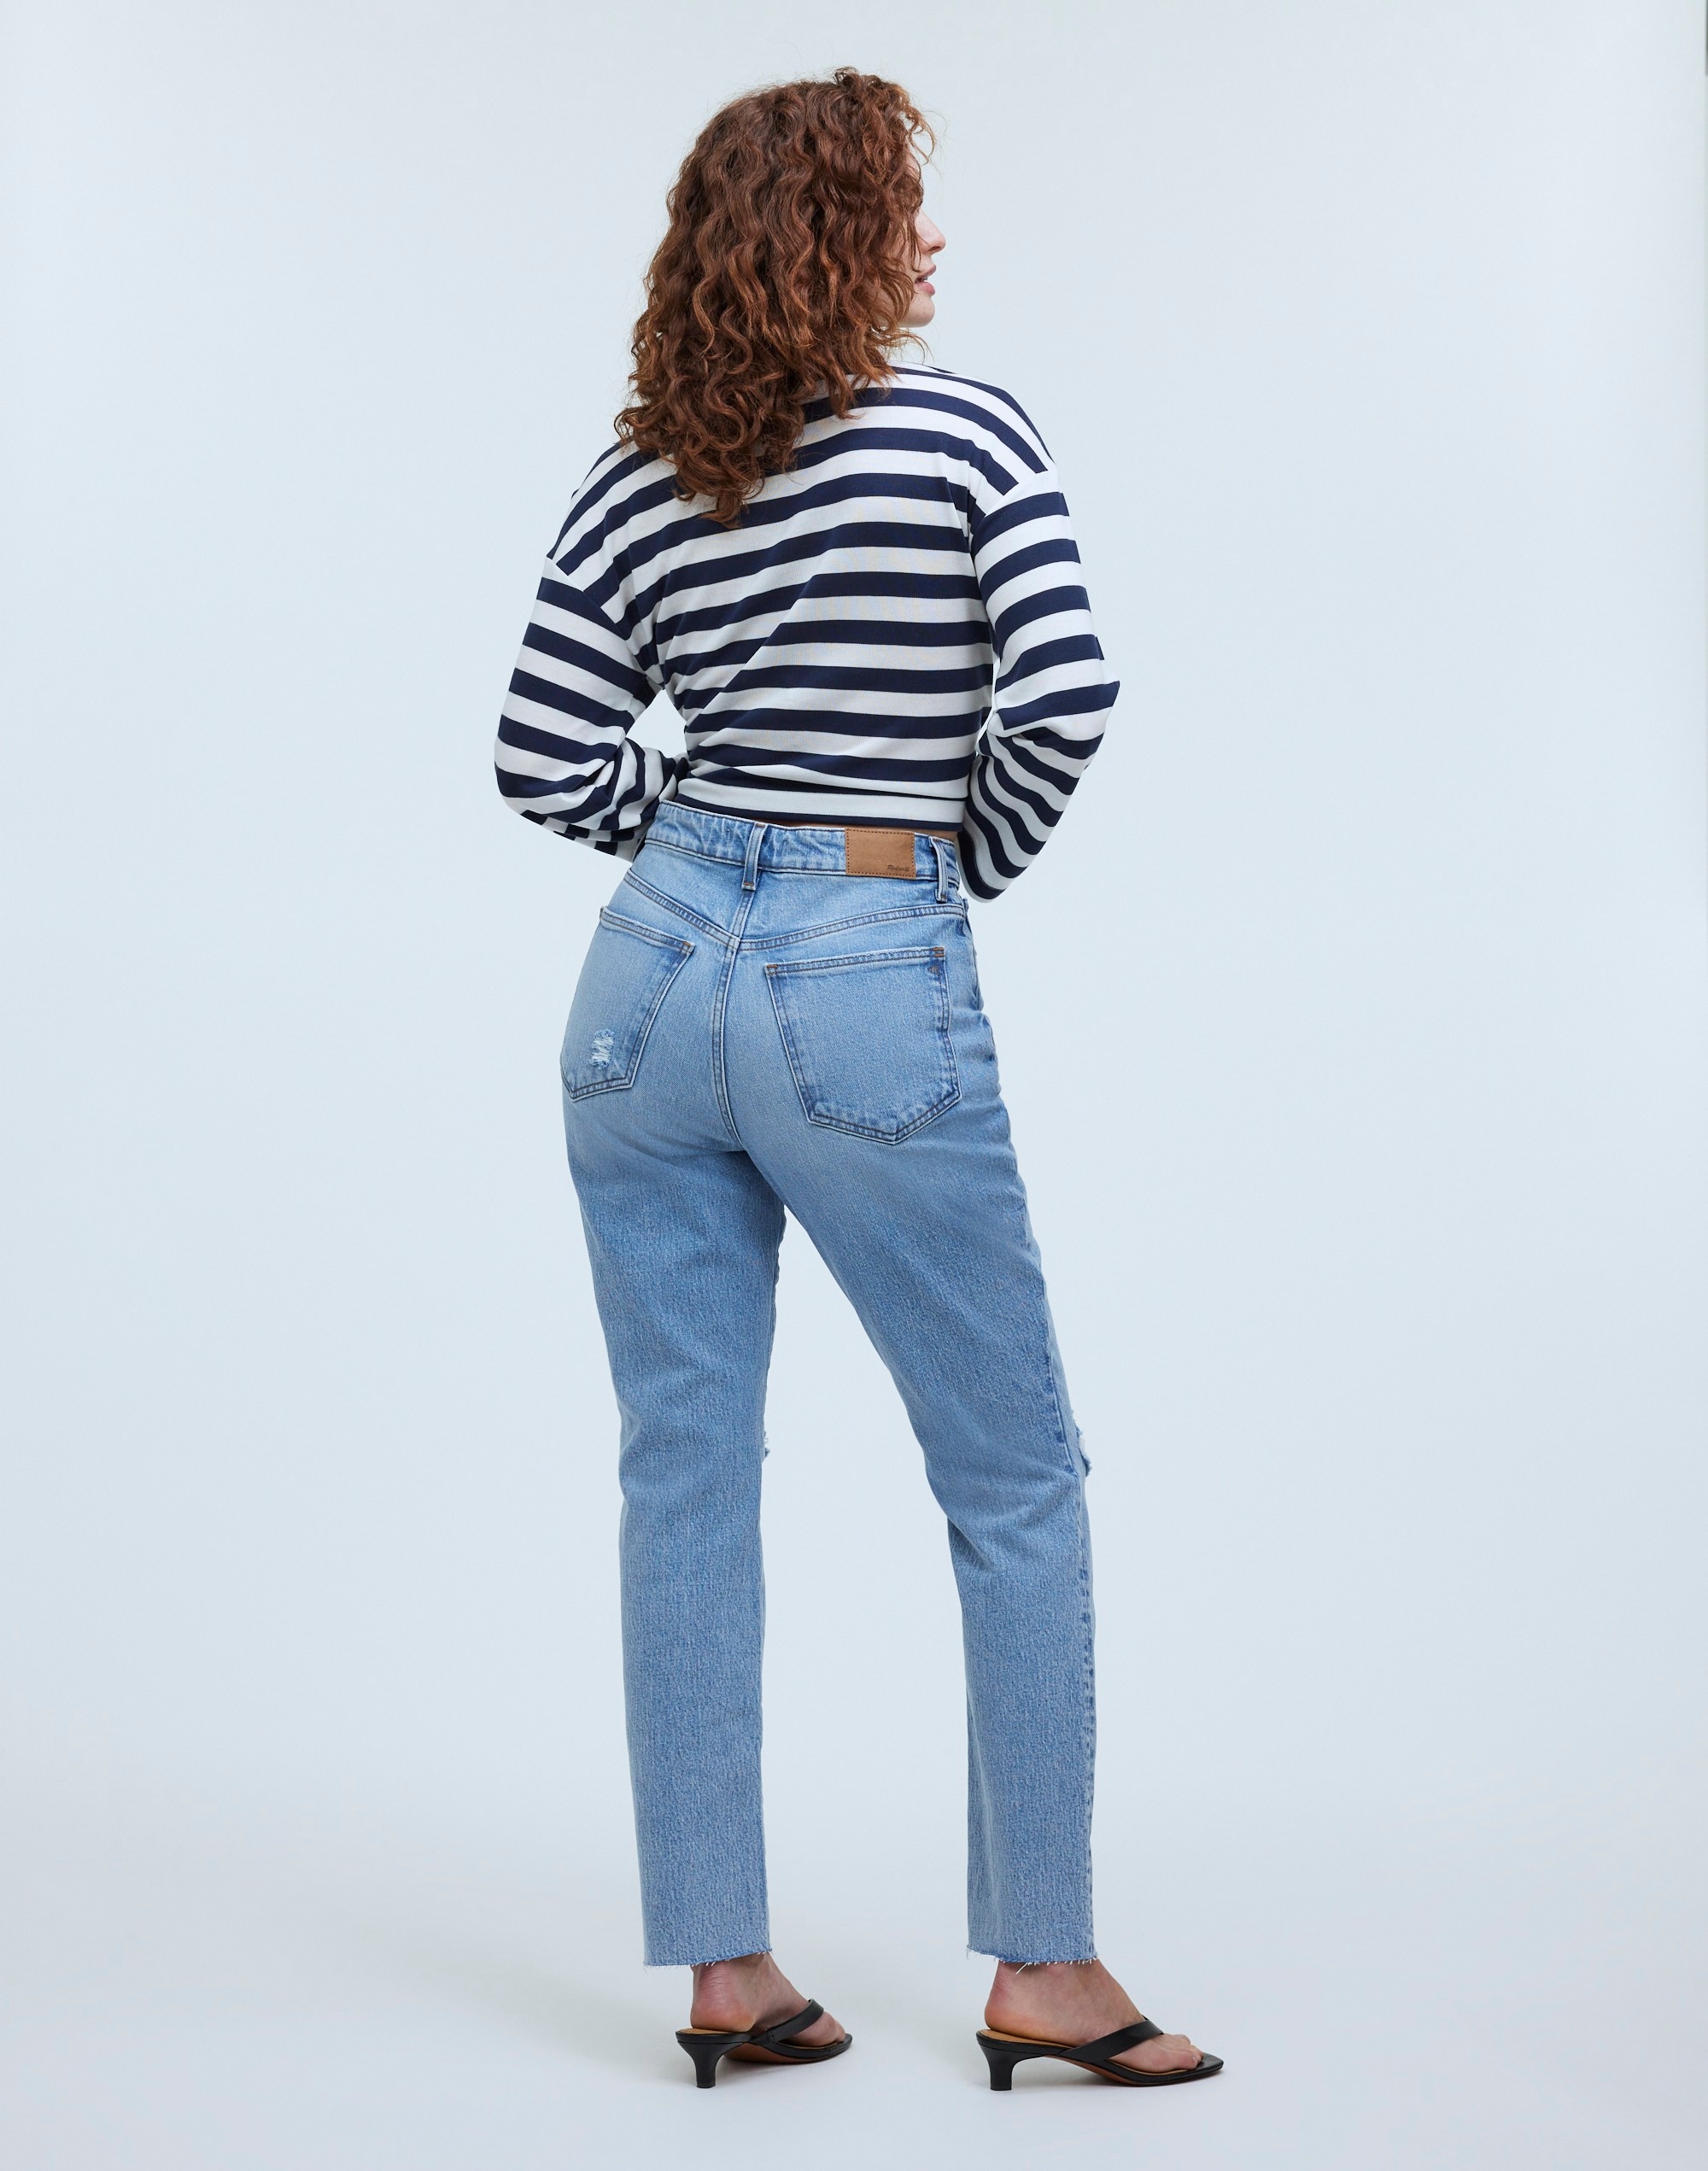 The Petite Curvy Perfect Vintage Jean Charnley Wash